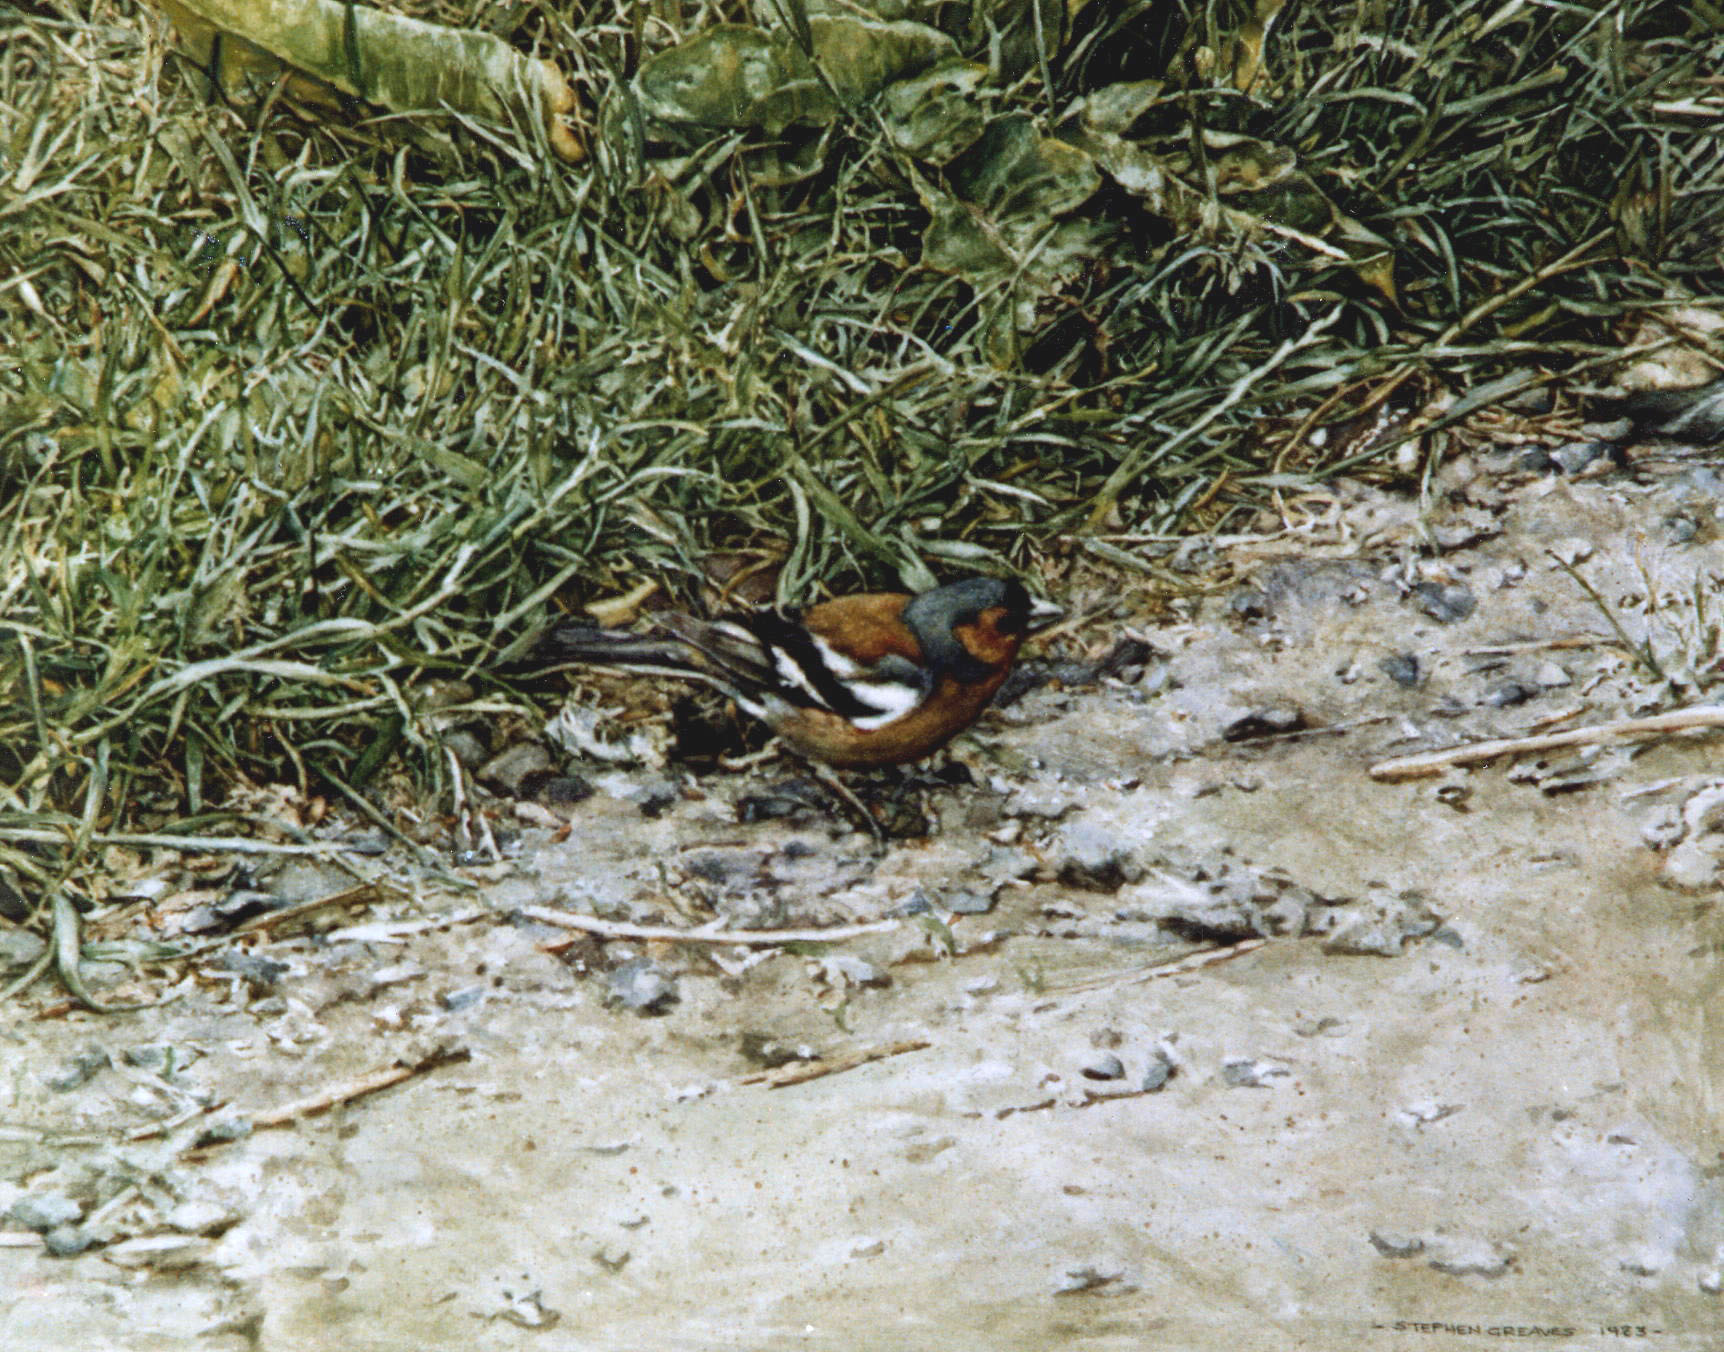 Back to: Chaffinch - photorealism bird painting